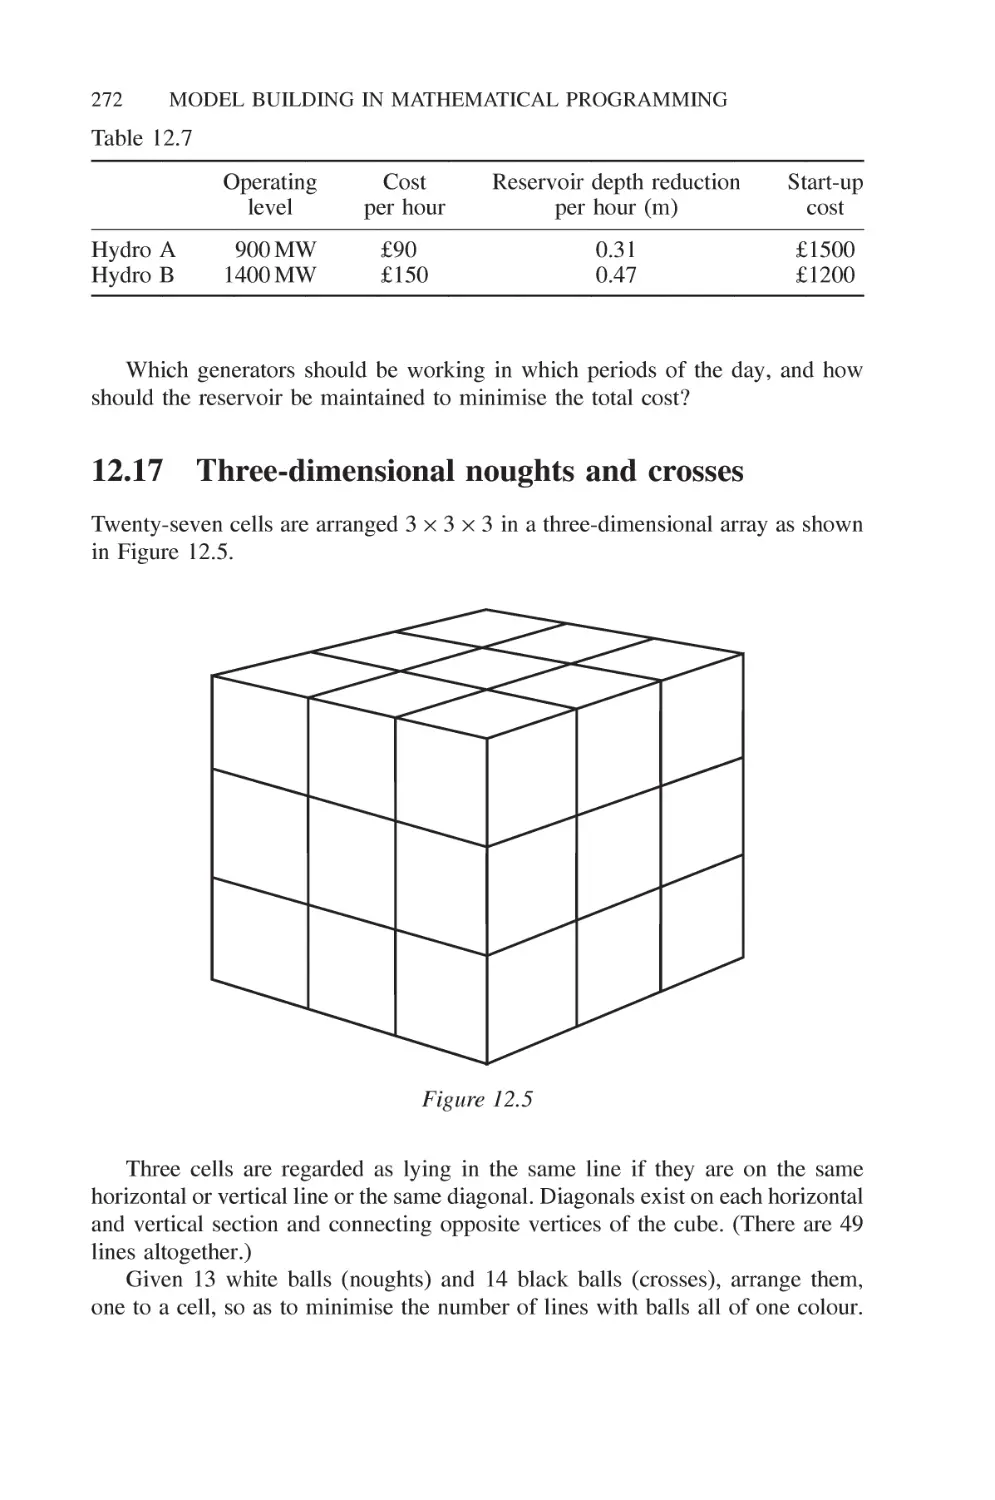 12.17 Three-dimensional noughts and crosses